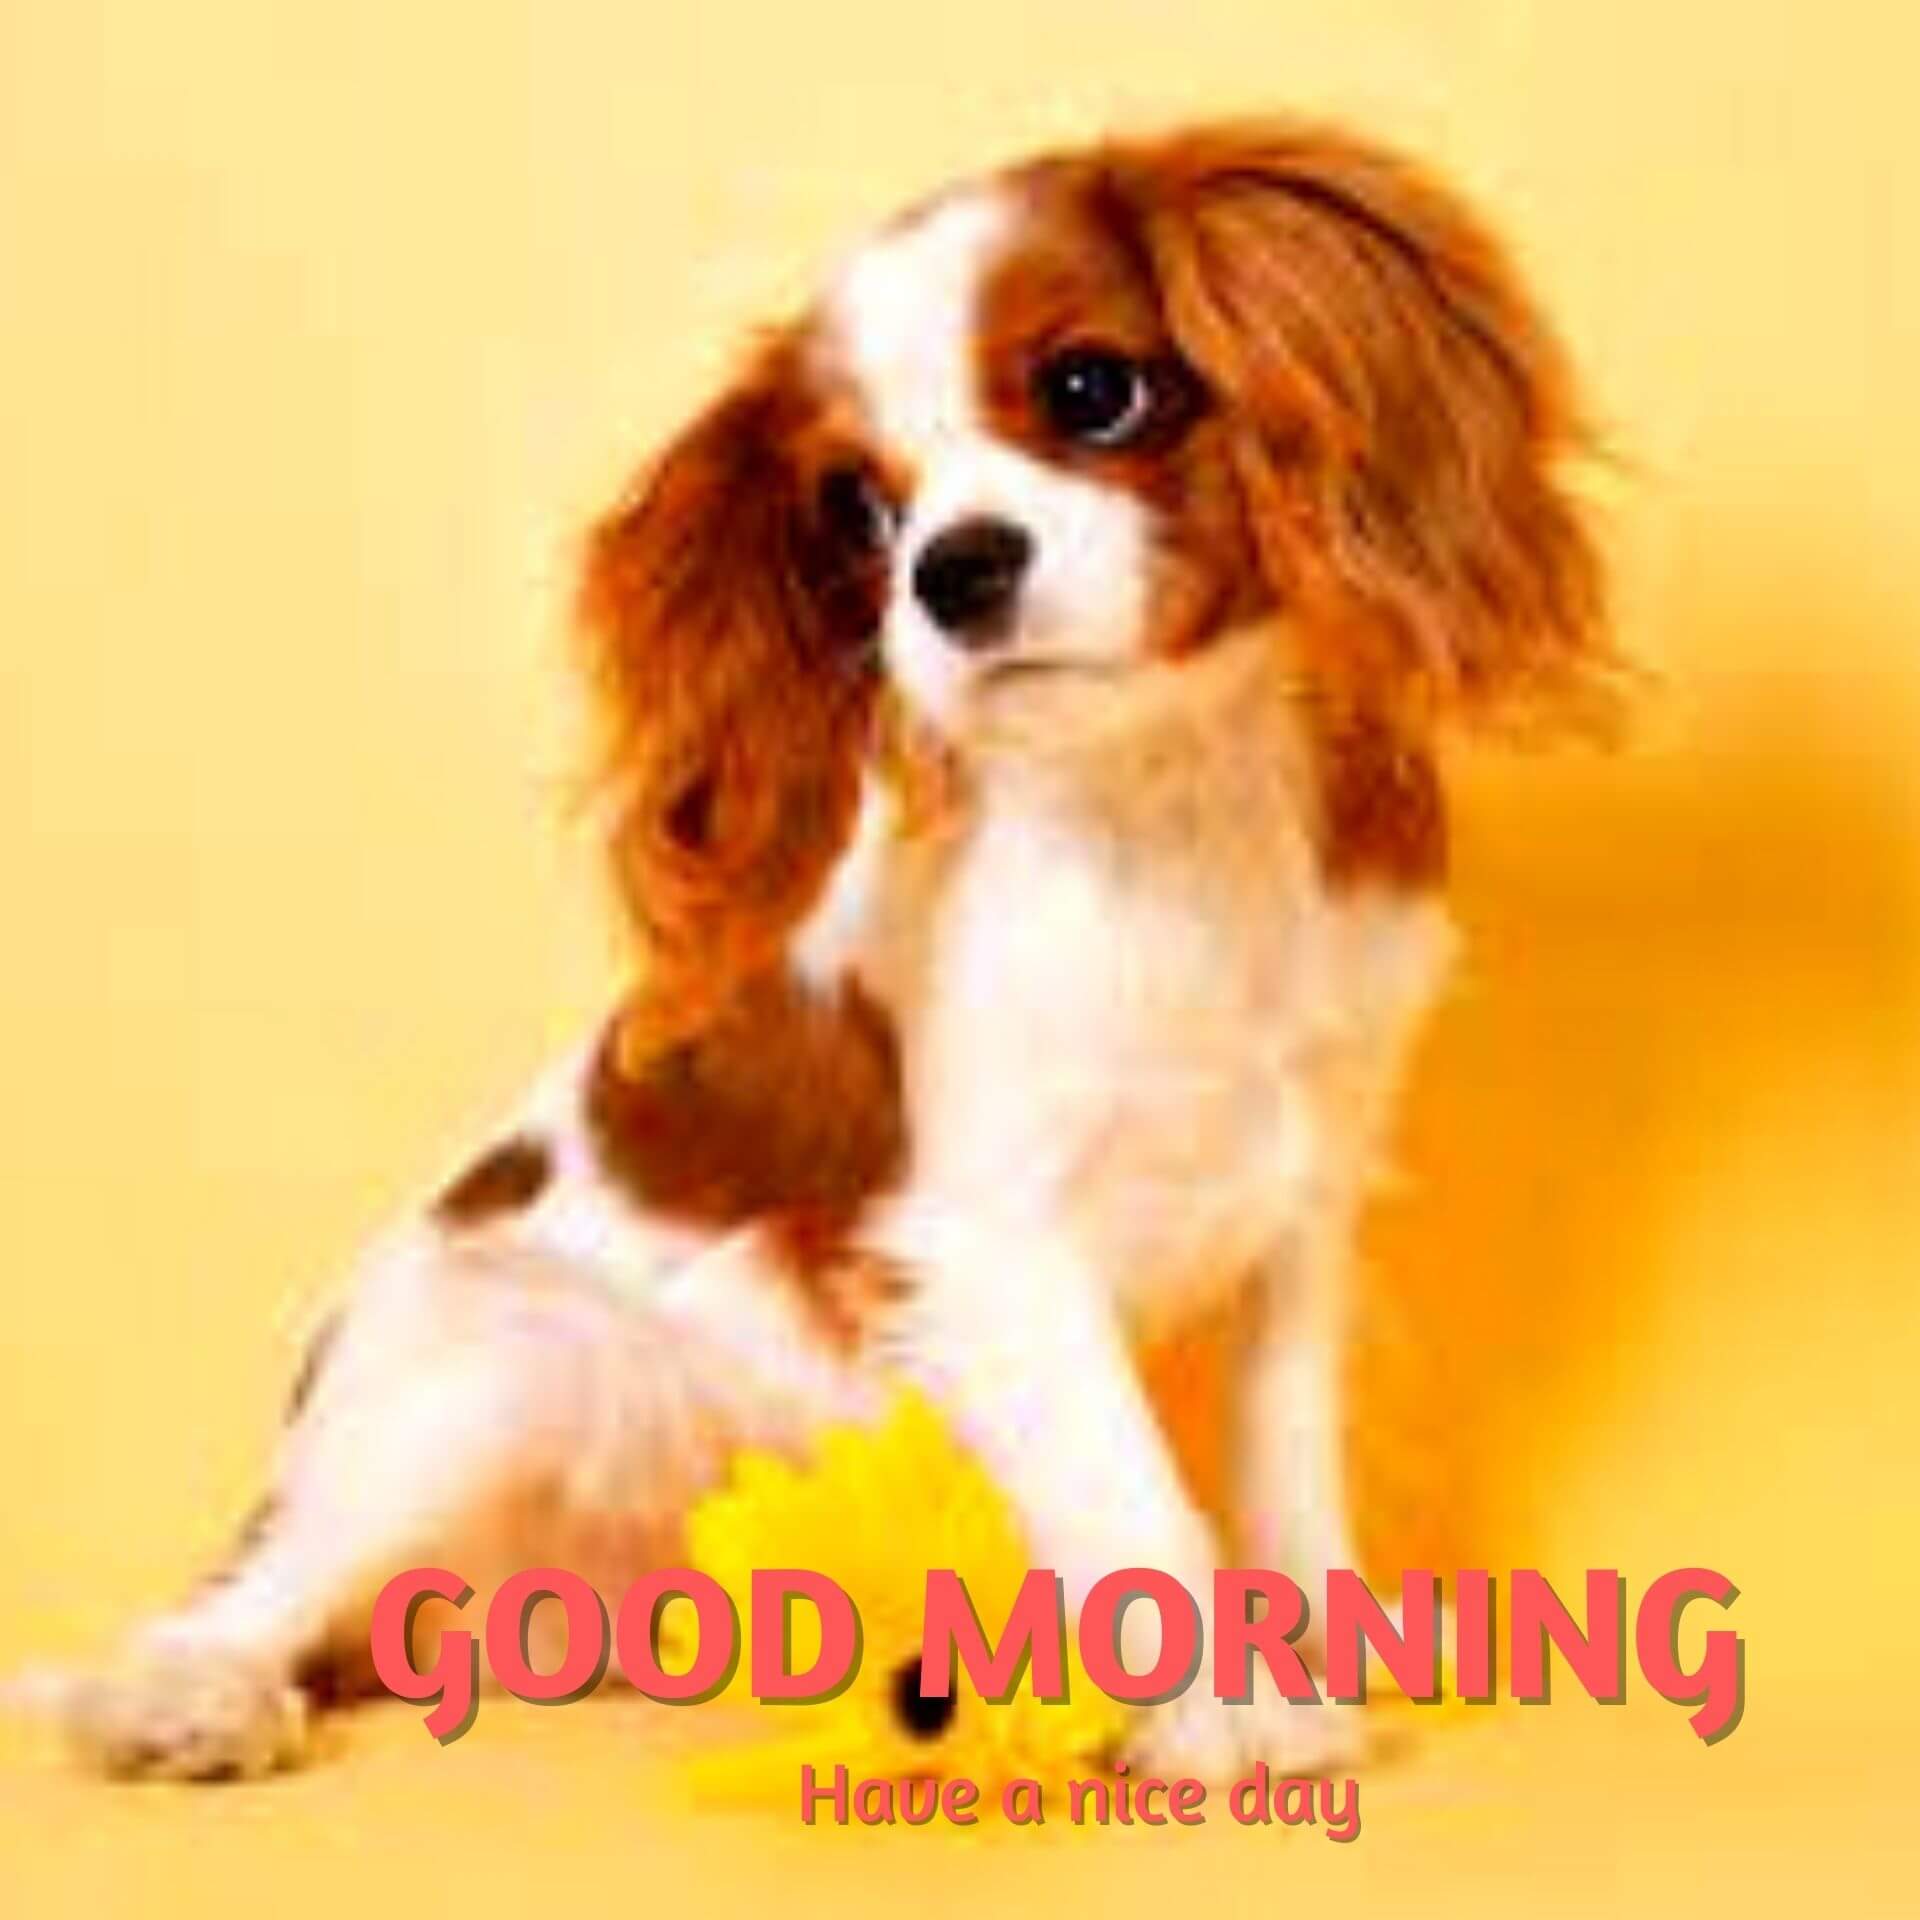 New HD Cute Puppy Good Morning Images Download 2023